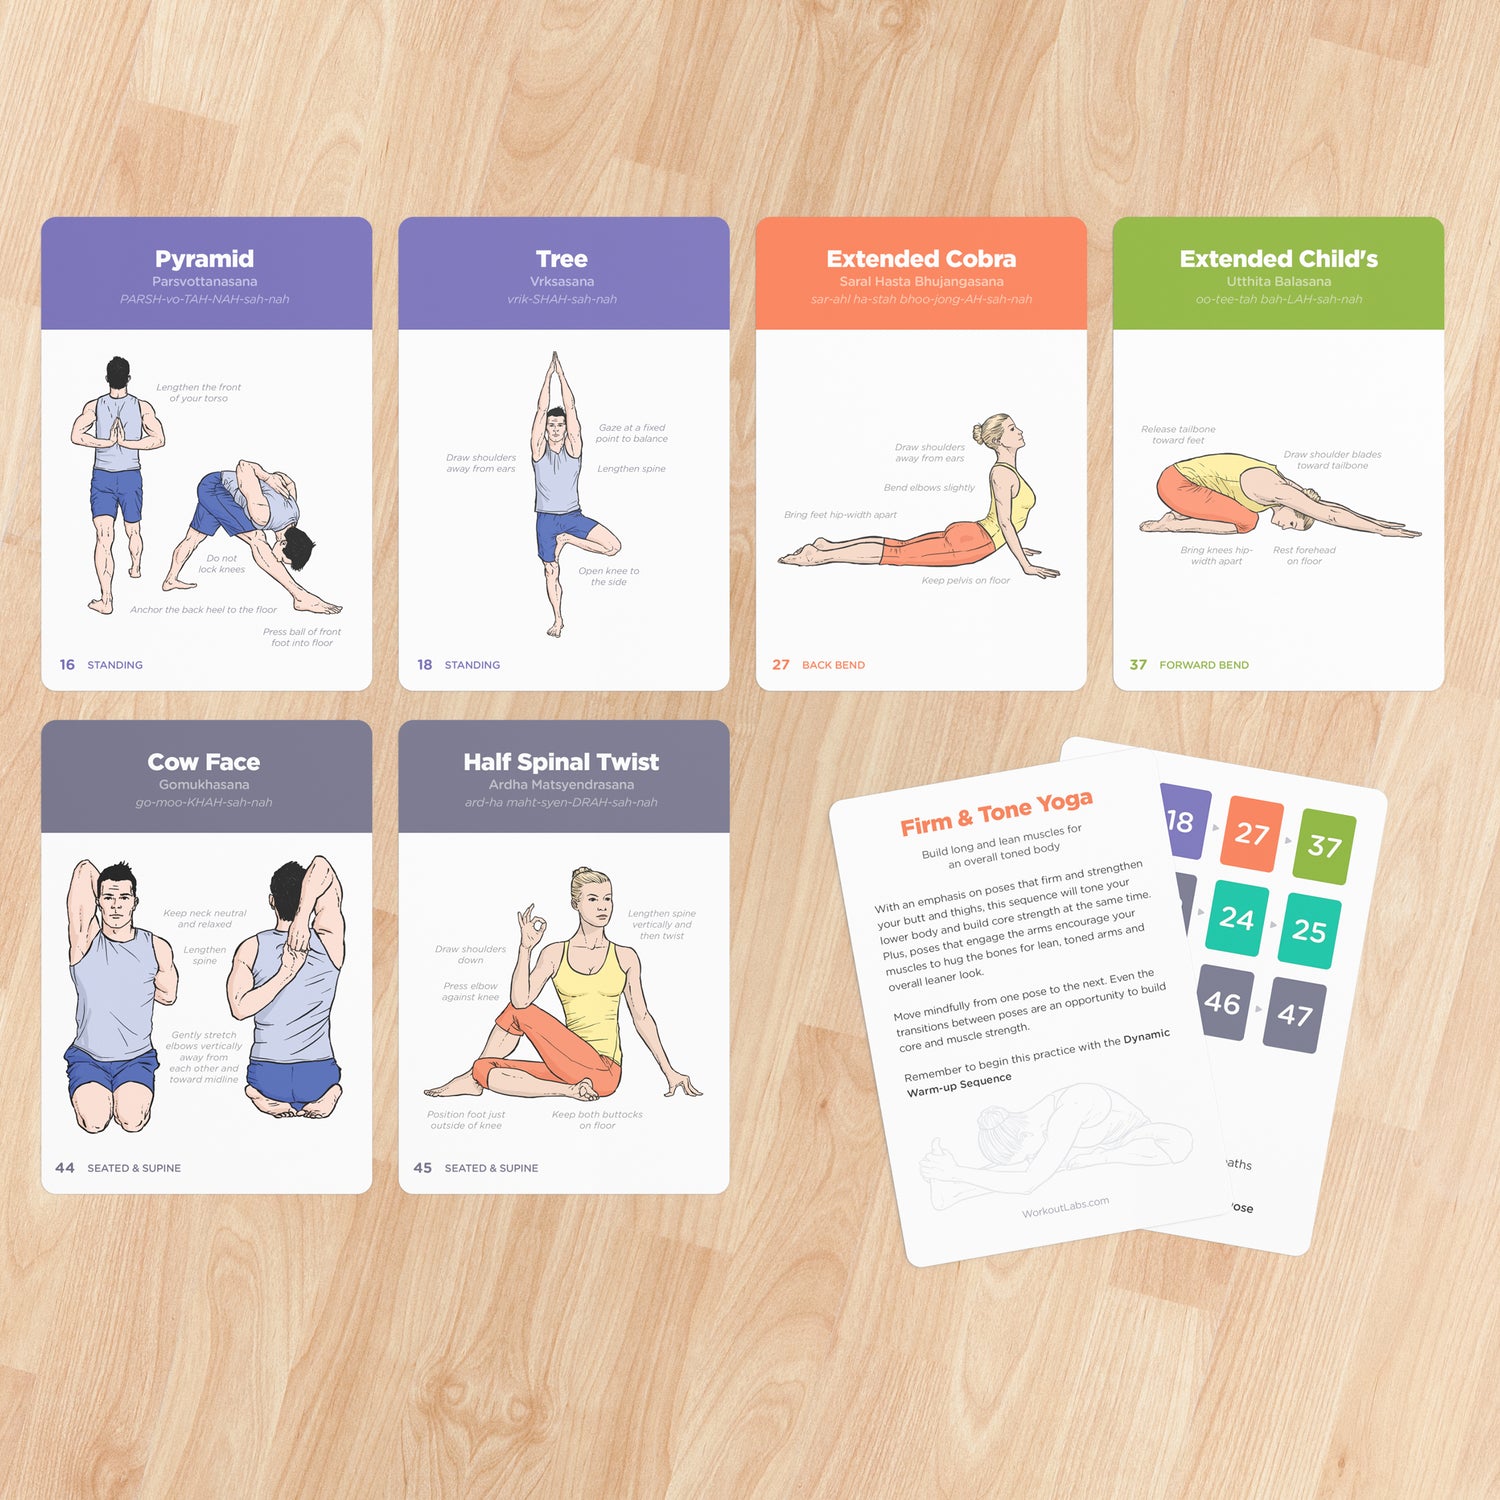 merka Yoga Cards - Yoga Deck Workout Cards 50 Cards Asana Yoga Poses  Positions and Exercises Made by Women for Beginners Starters or Masters of  Yoga